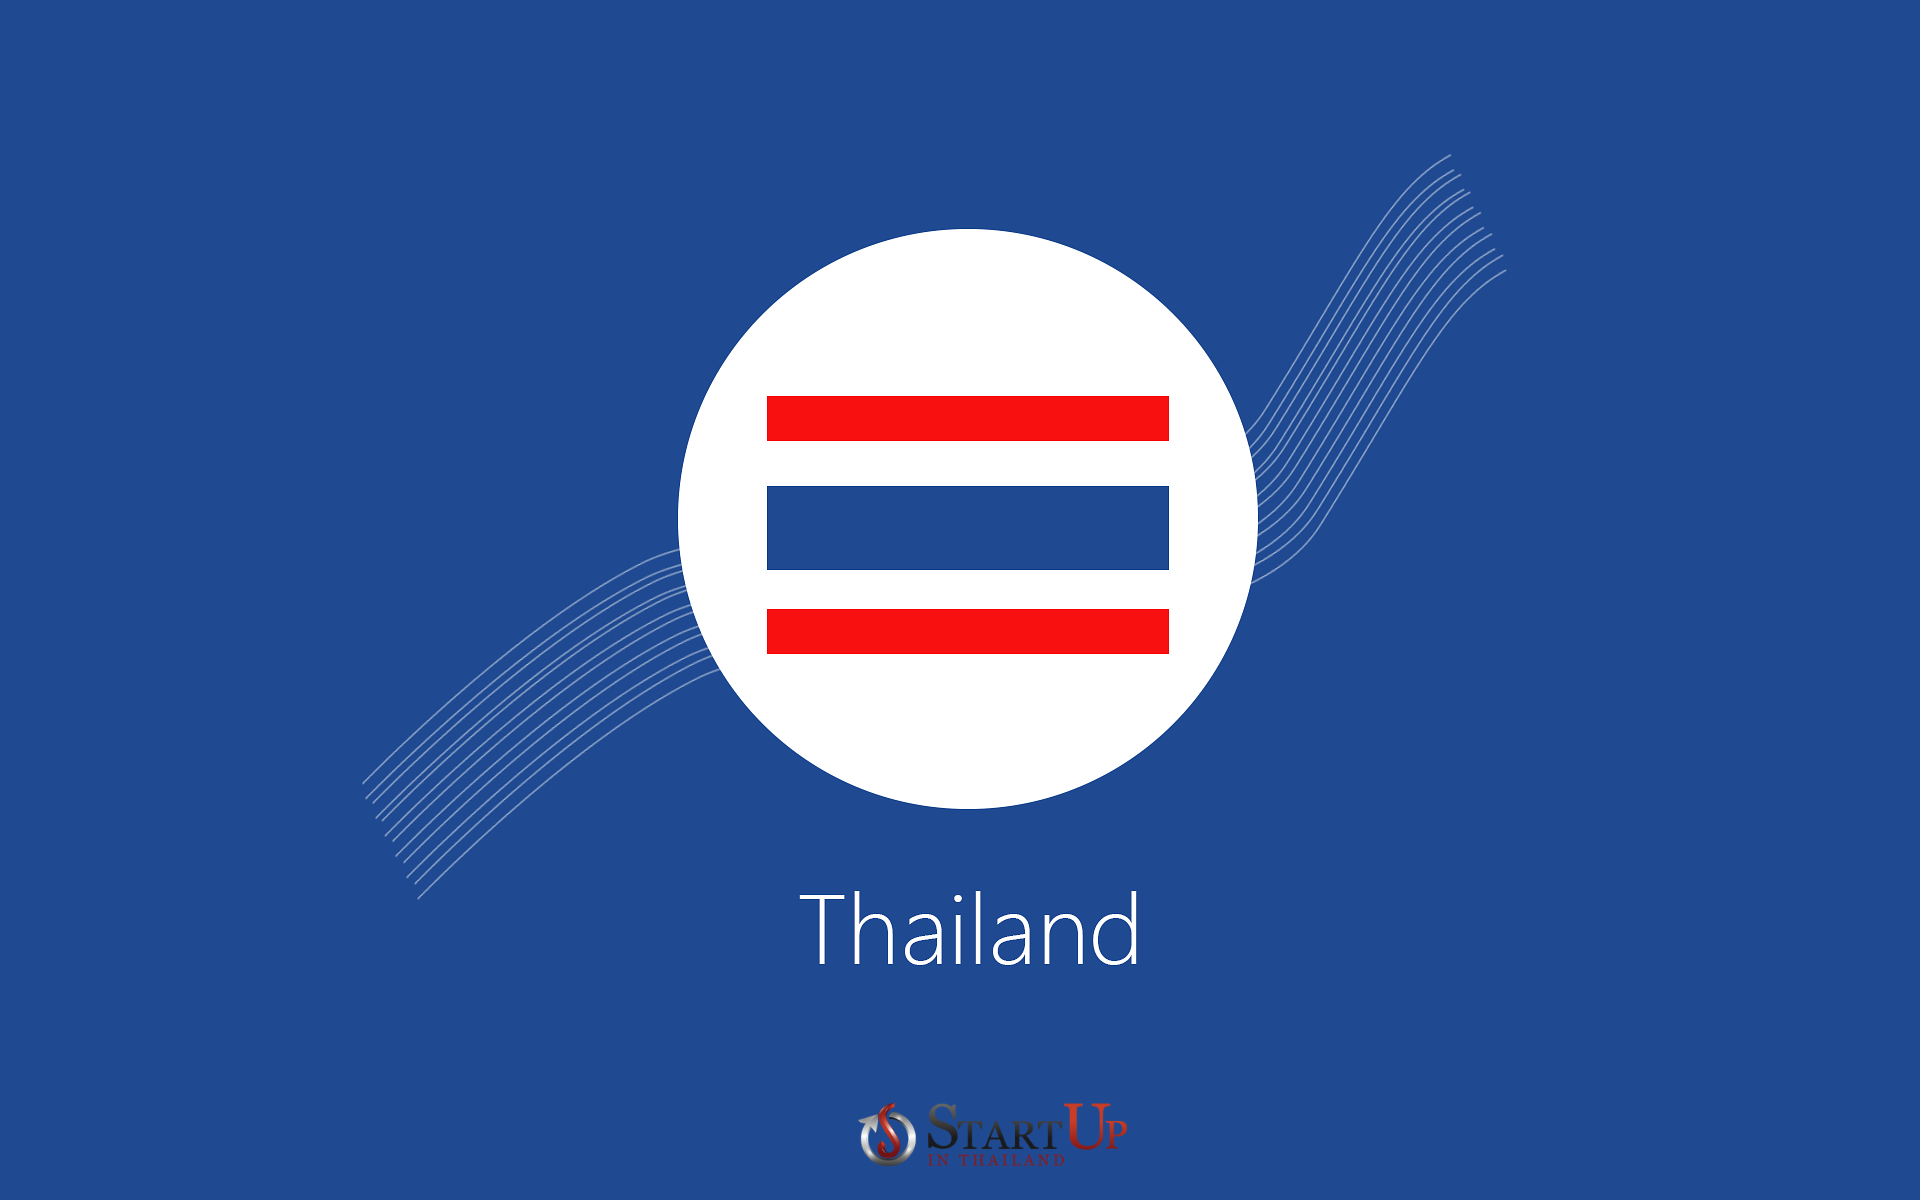 How to apply for Thai Citizenship?